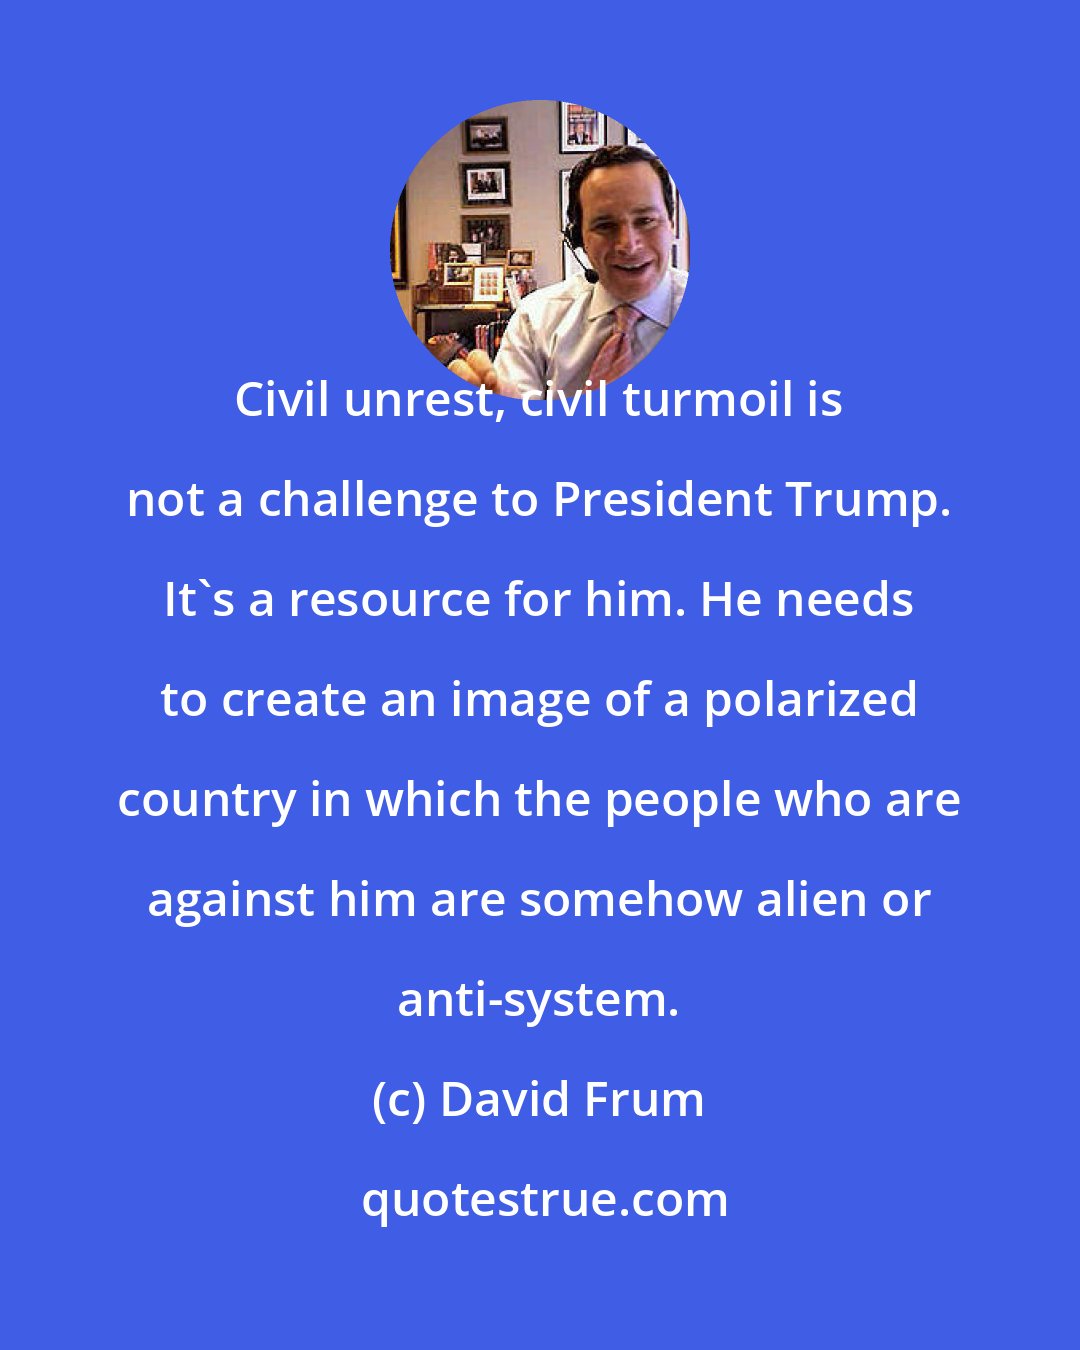 David Frum: Civil unrest, civil turmoil is not a challenge to President Trump. It's a resource for him. He needs to create an image of a polarized country in which the people who are against him are somehow alien or anti-system.